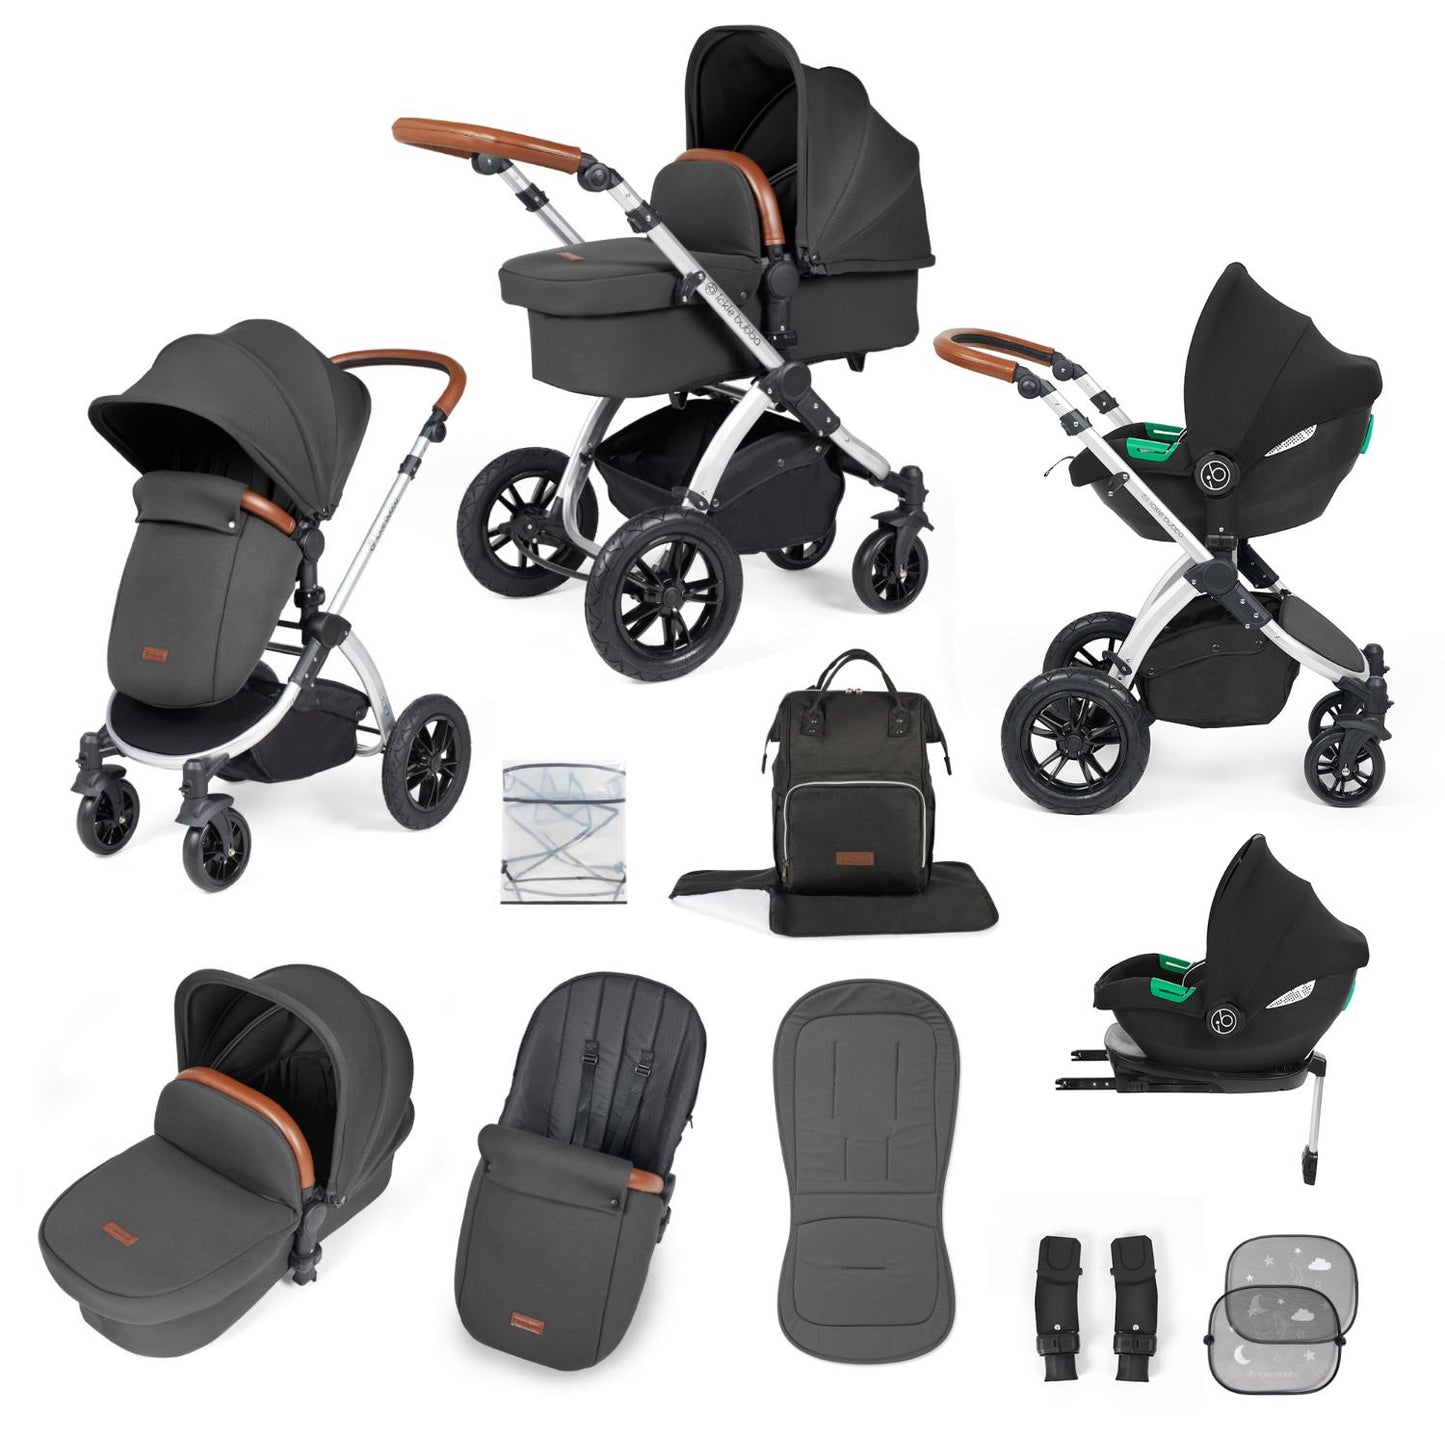 Ickle Bubba Stomp Luxe All-in-One Travel System with Cirrus i-Size Car Seat and ISOFIX Base and accessories in Charcoal Grey colour with silver chassis and tan handle